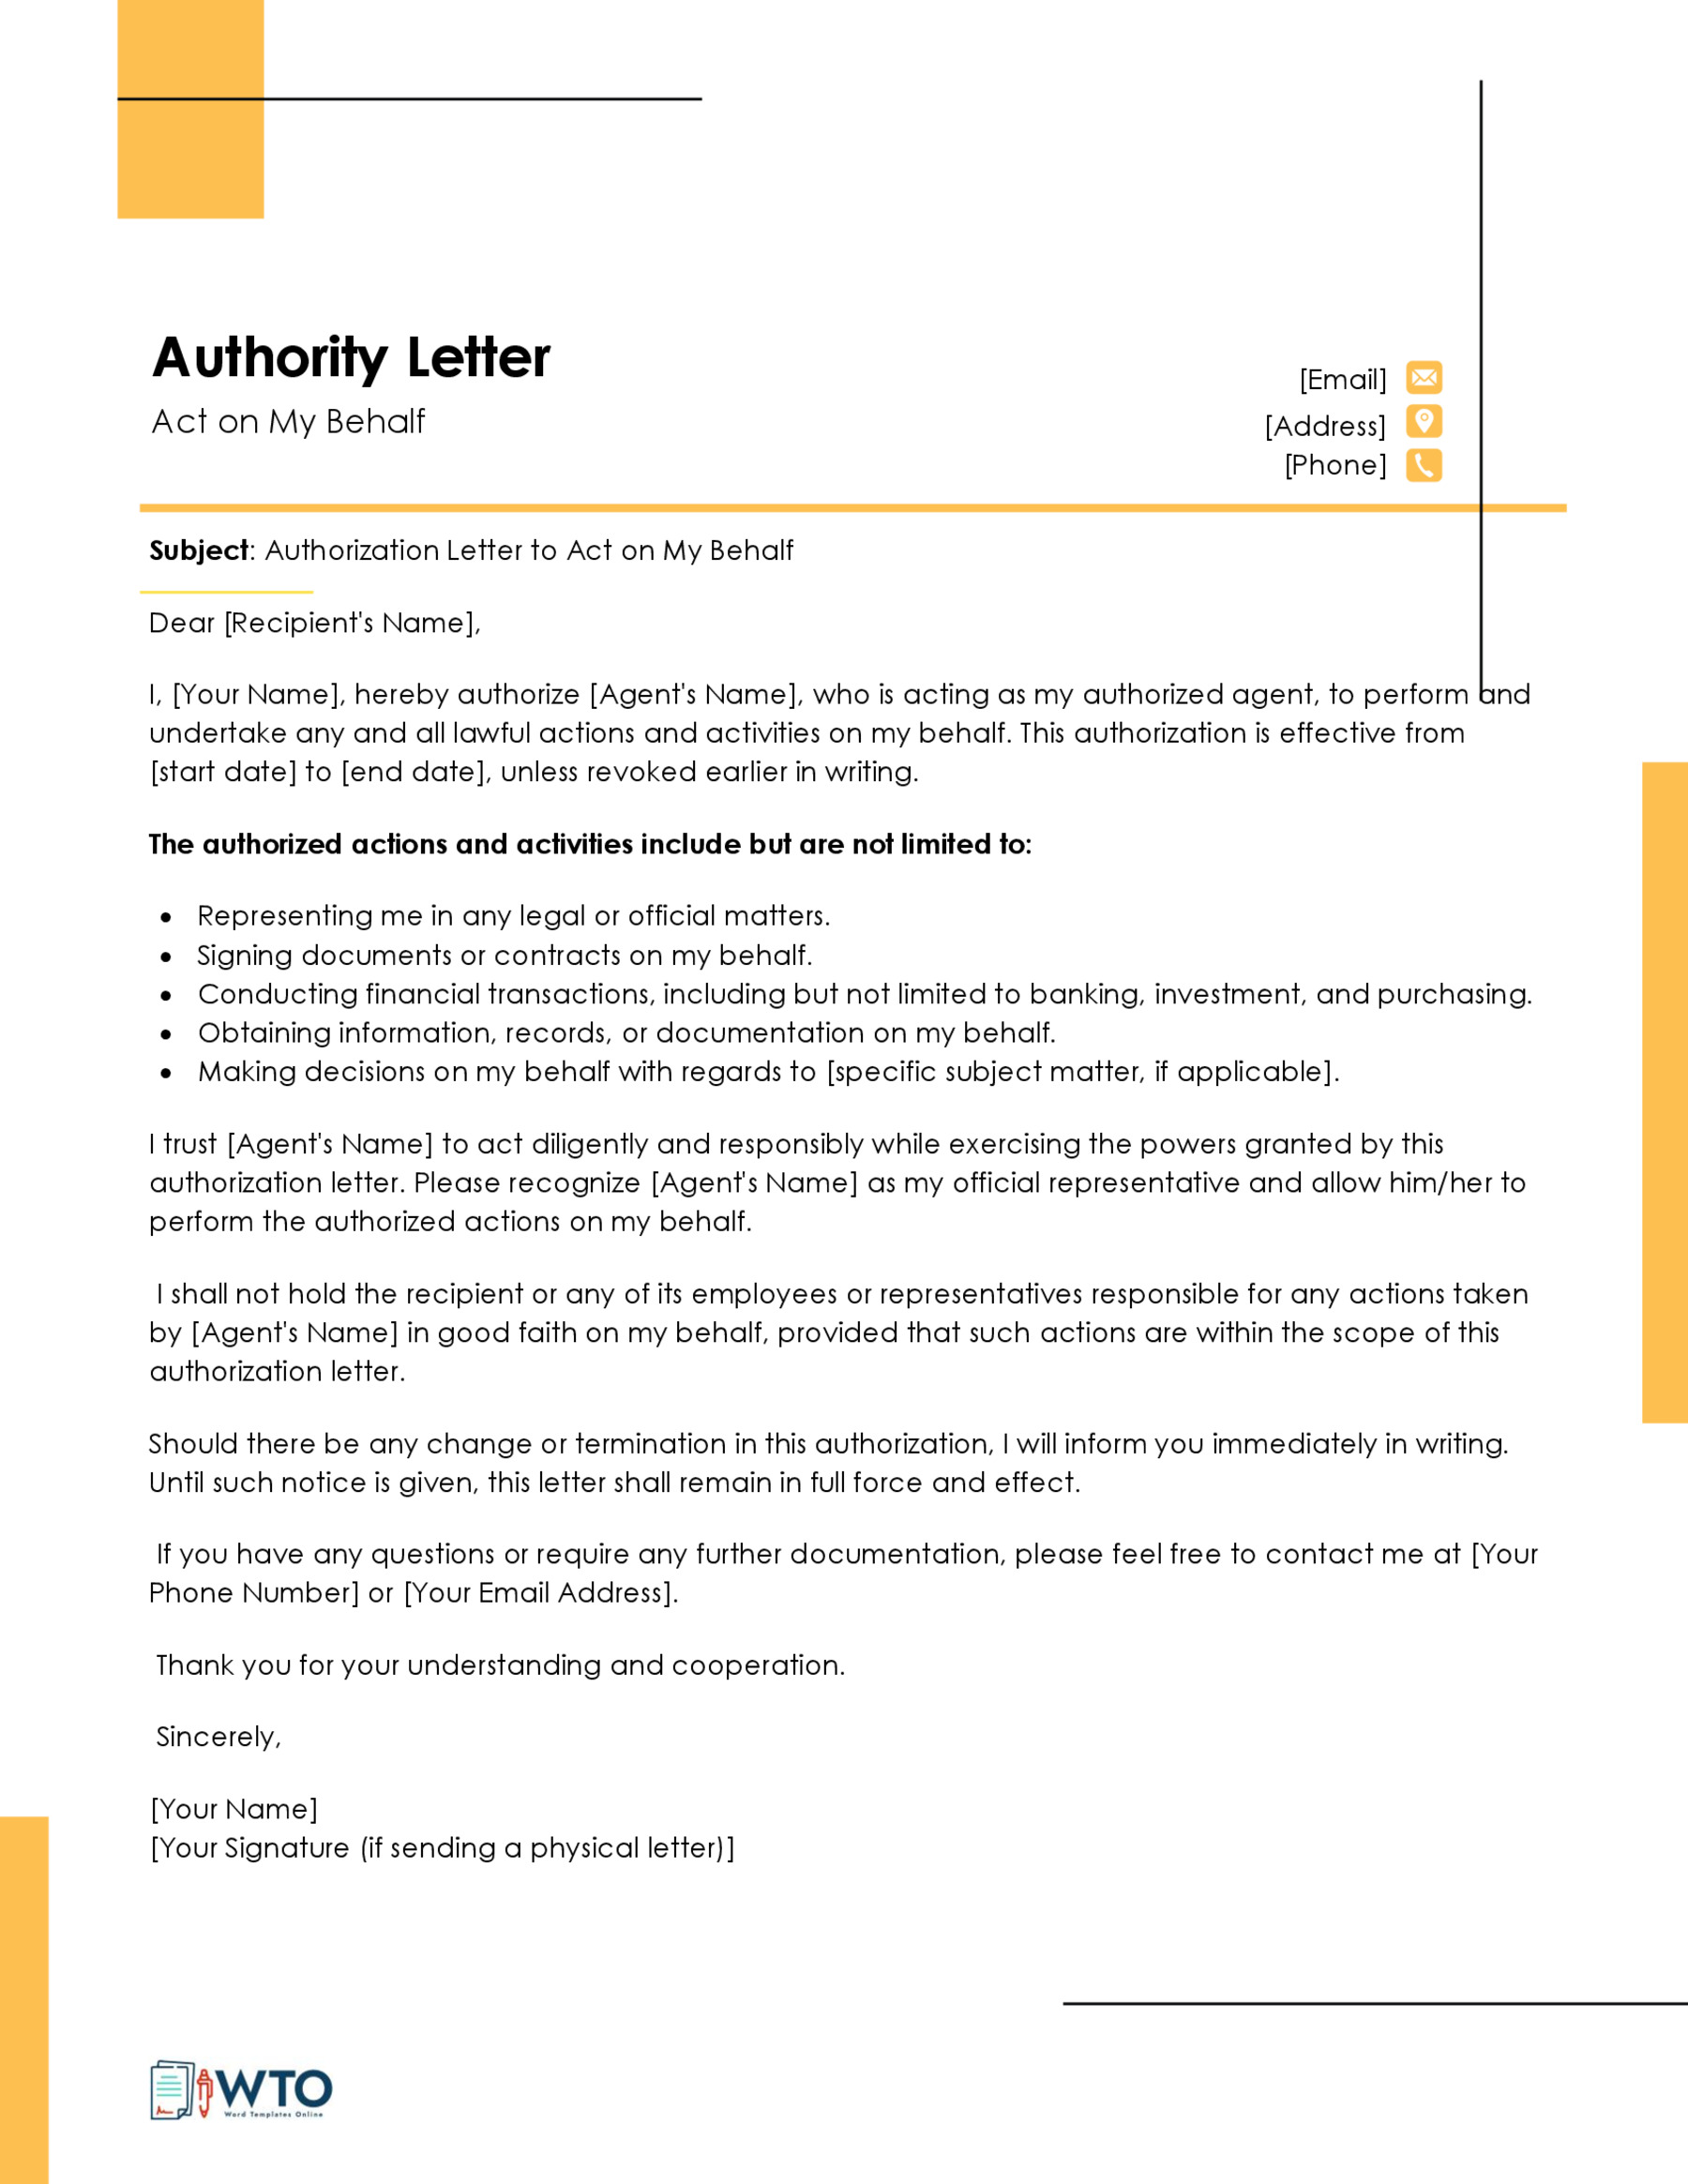 Free Editable Act on Behalf Authorization Letter Template 03 for Word Document